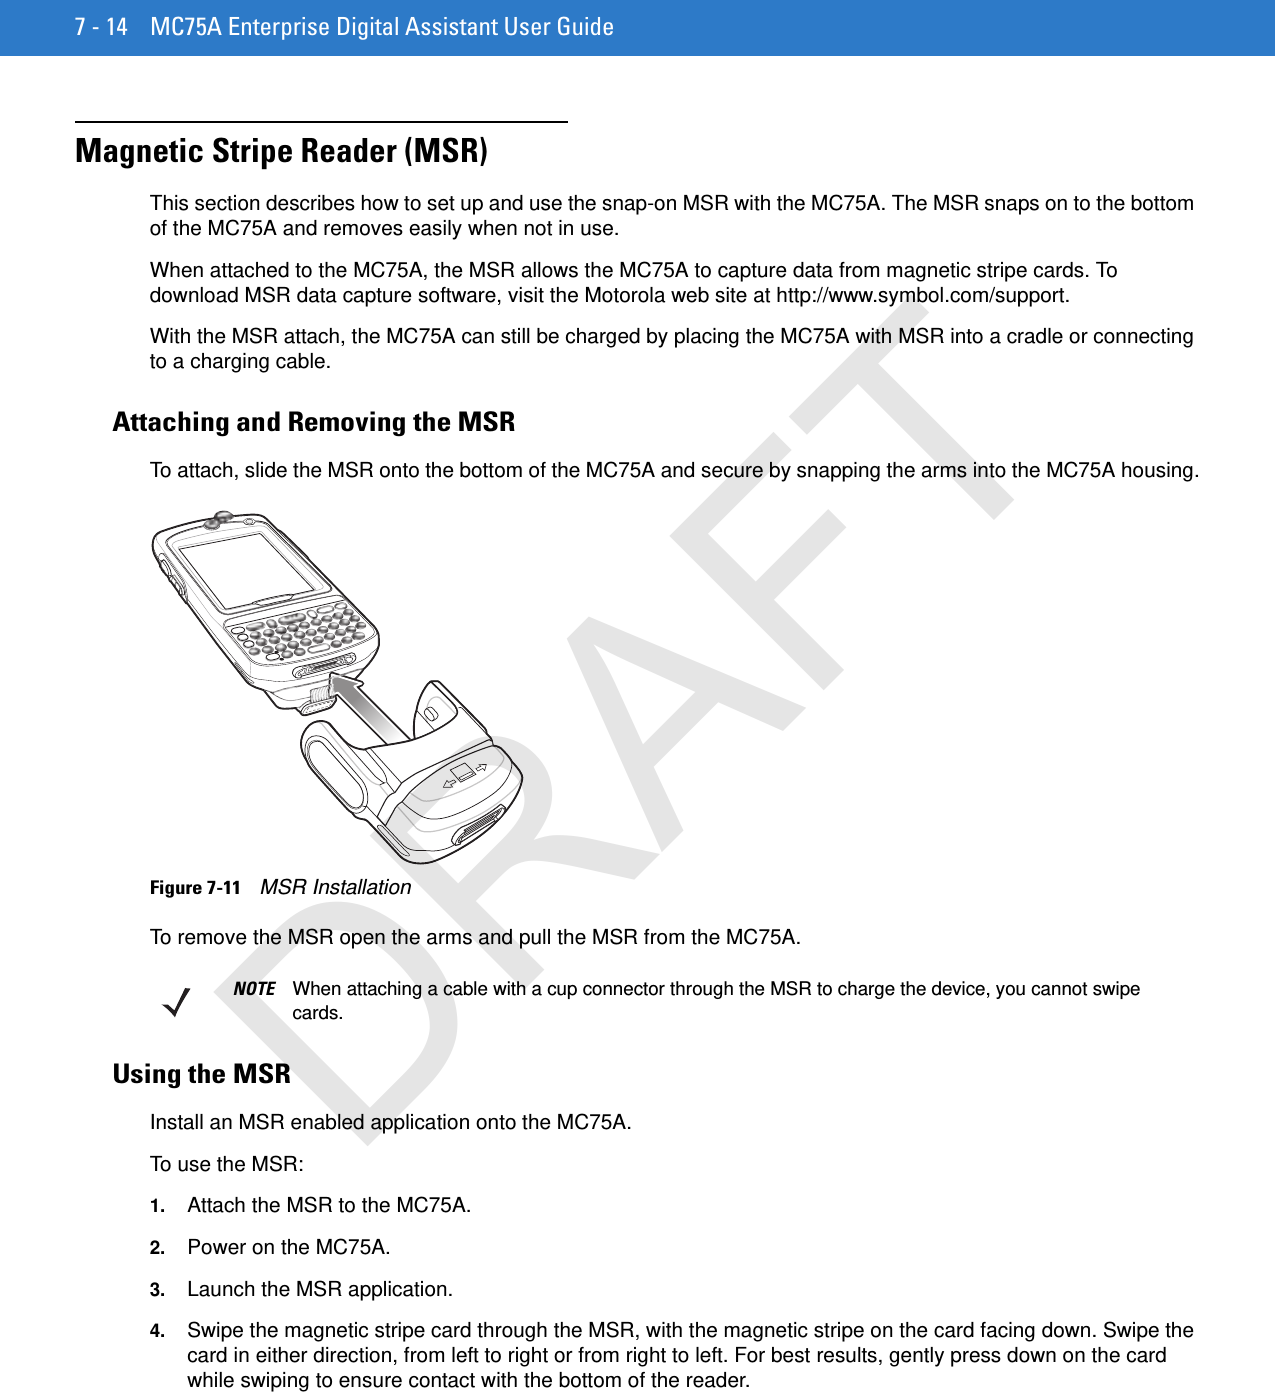 7 - 14 MC75A Enterprise Digital Assistant User GuideMagnetic Stripe Reader (MSR)This section describes how to set up and use the snap-on MSR with the MC75A. The MSR snaps on to the bottom of the MC75A and removes easily when not in use.When attached to the MC75A, the MSR allows the MC75A to capture data from magnetic stripe cards. To download MSR data capture software, visit the Motorola web site at http://www.symbol.com/support.With the MSR attach, the MC75A can still be charged by placing the MC75A with MSR into a cradle or connecting to a charging cable.Attaching and Removing the MSRTo attach, slide the MSR onto the bottom of the MC75A and secure by snapping the arms into the MC75A housing.Figure 7-11    MSR InstallationTo remove the MSR open the arms and pull the MSR from the MC75A.Using the MSRInstall an MSR enabled application onto the MC75A.To use the MSR:1. Attach the MSR to the MC75A.2. Power on the MC75A.3. Launch the MSR application.4. Swipe the magnetic stripe card through the MSR, with the magnetic stripe on the card facing down. Swipe the card in either direction, from left to right or from right to left. For best results, gently press down on the card while swiping to ensure contact with the bottom of the reader.NOTE When attaching a cable with a cup connector through the MSR to charge the device, you cannot swipe cards.DRAFT